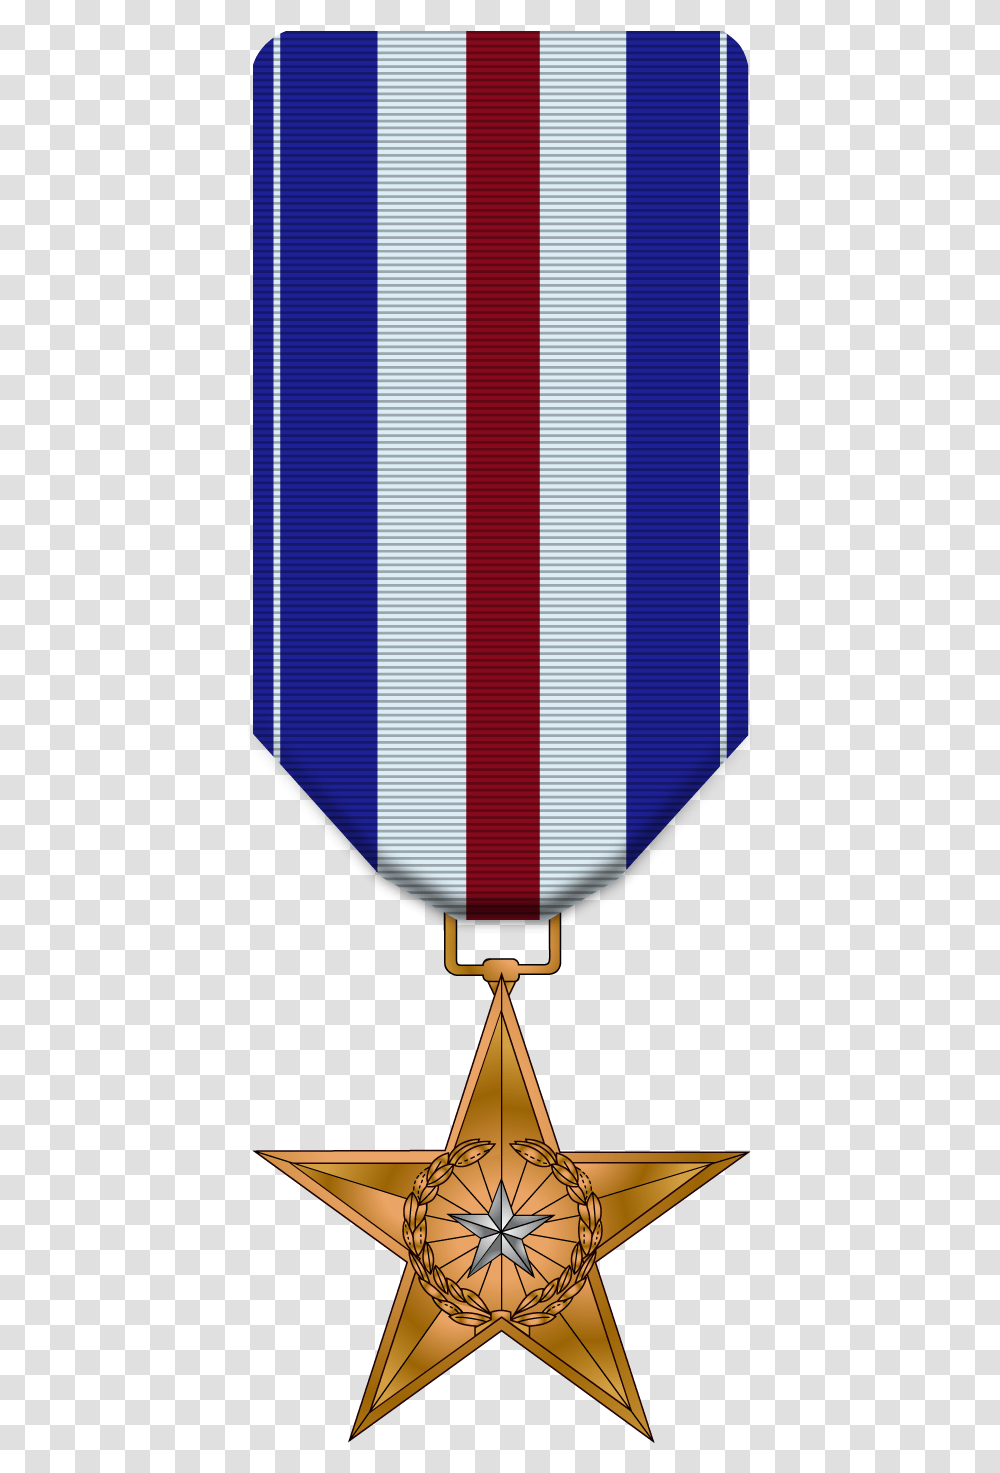 Library Of Star Medal Clipart Black And White Files Silver Star Award, Lamp, Aircraft, Vehicle, Transportation Transparent Png